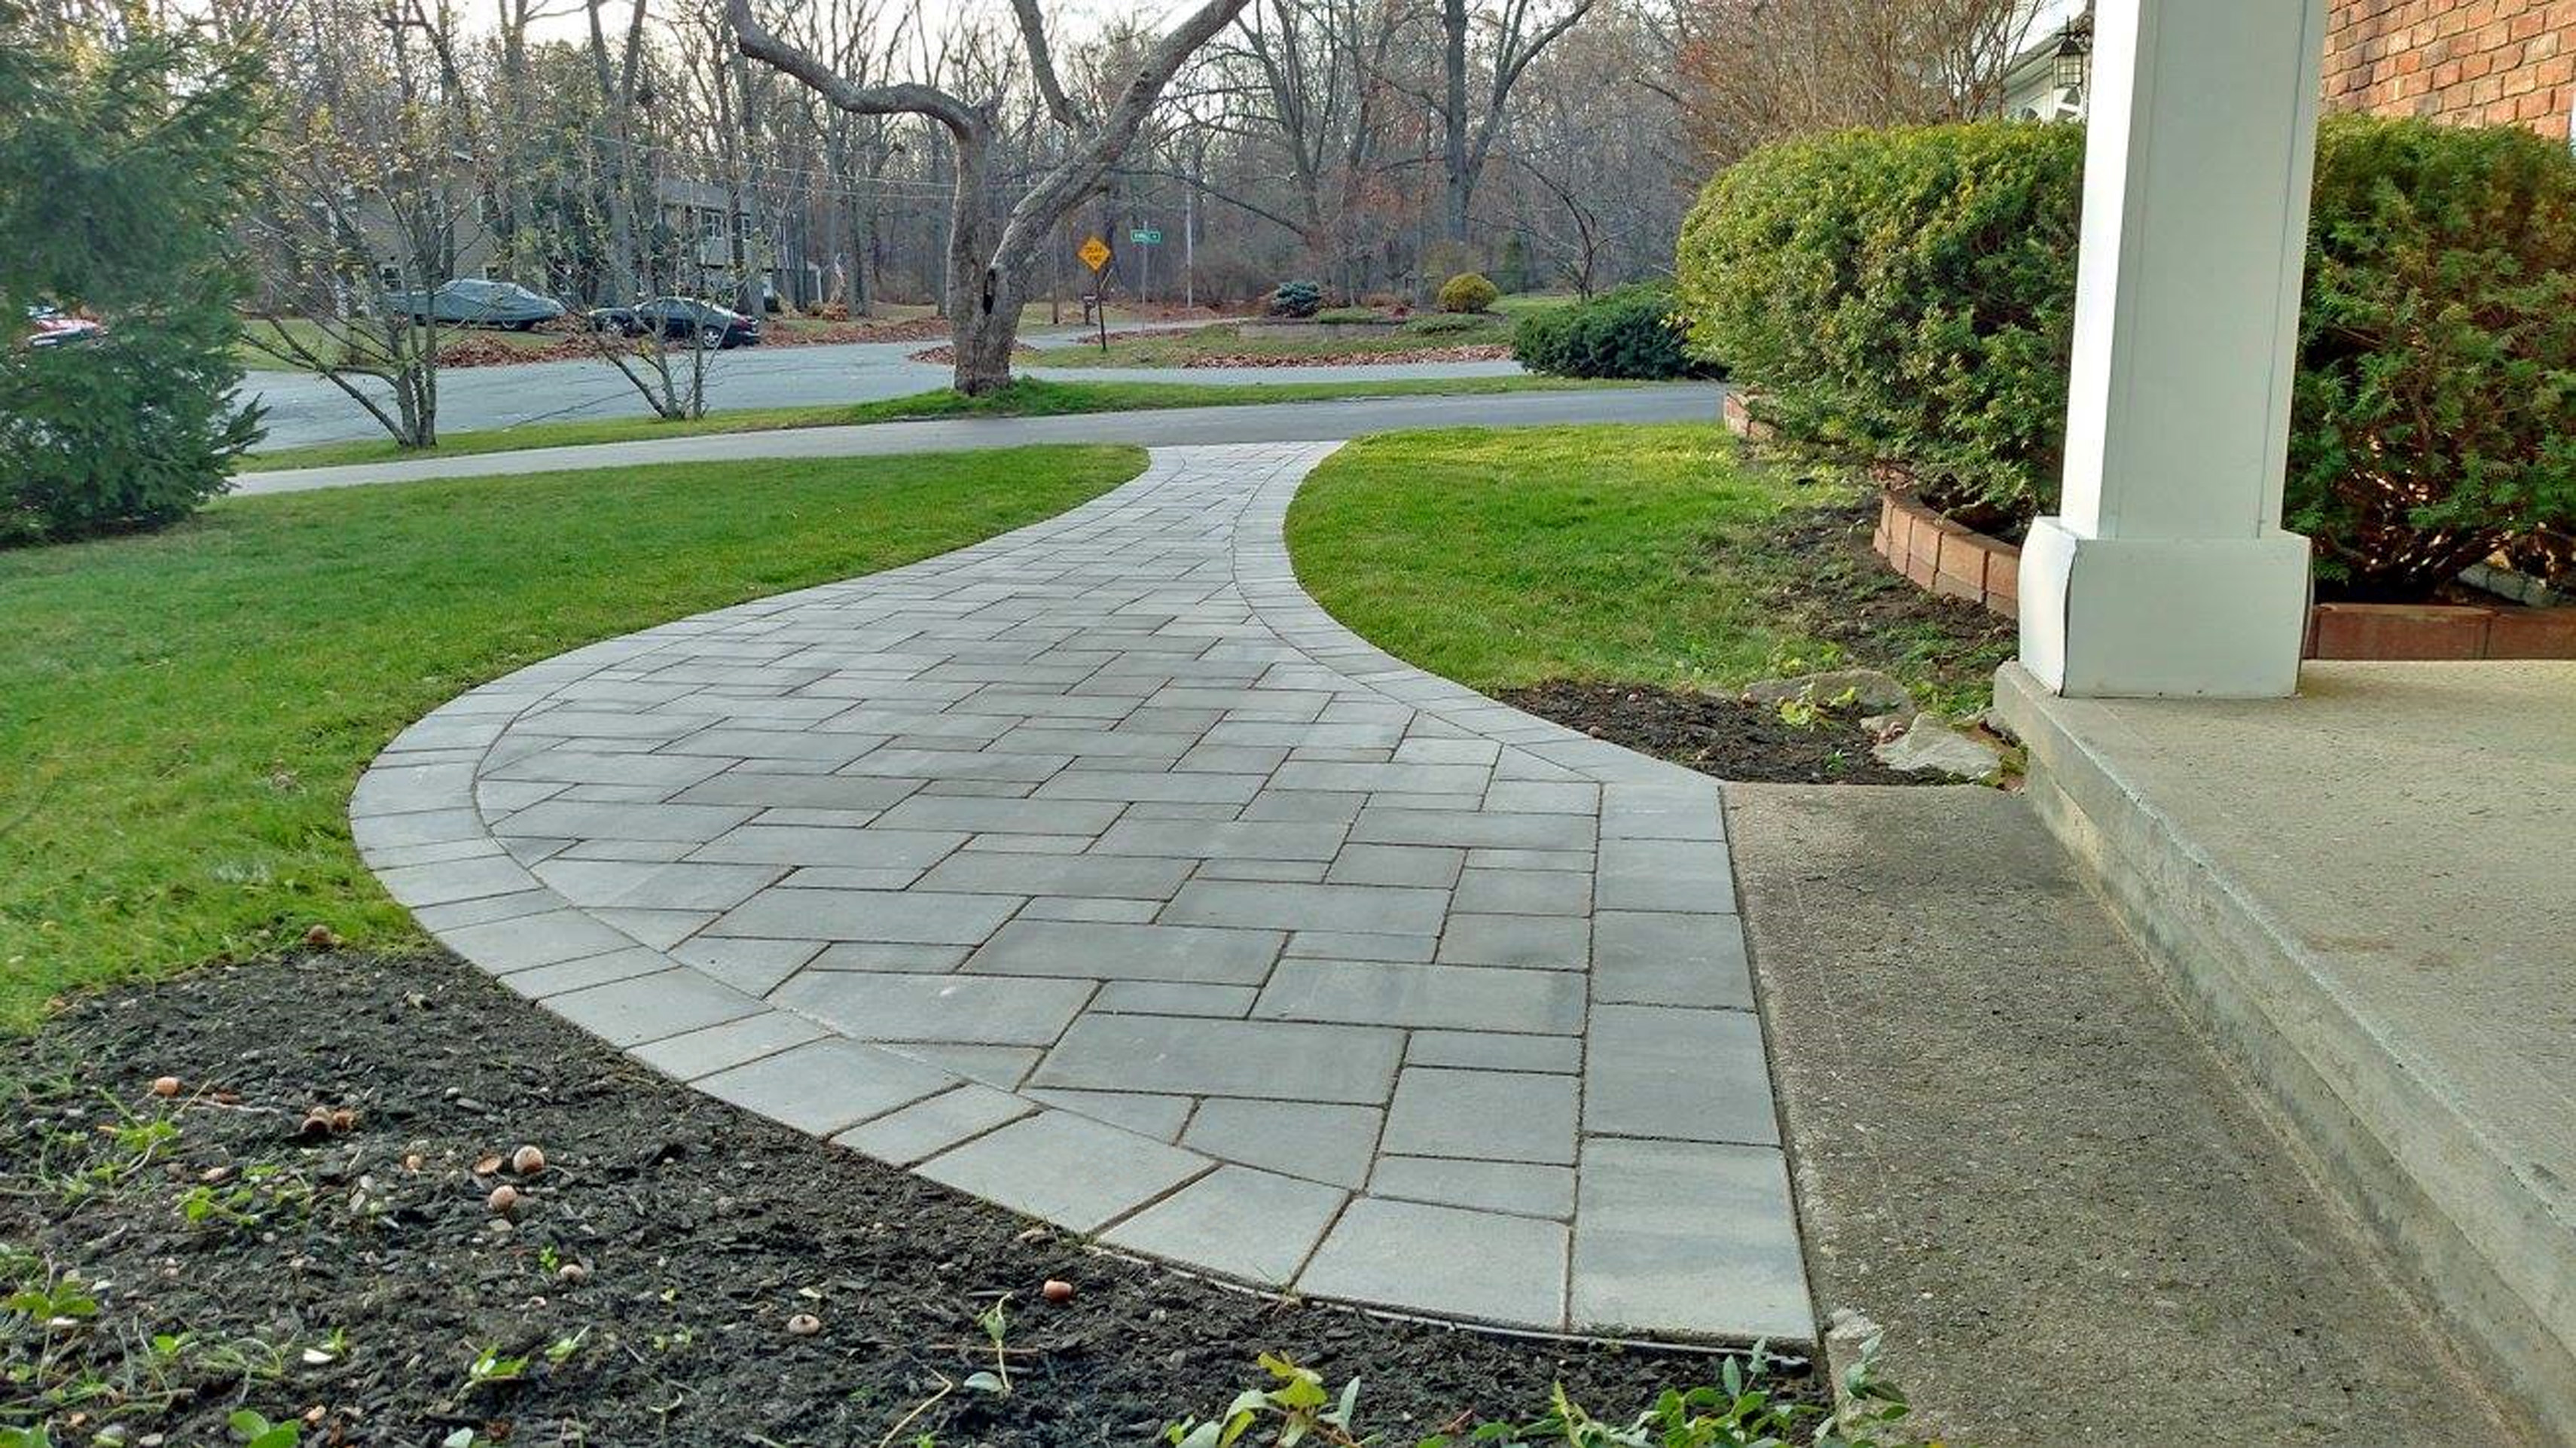 Completed sidewalk made from stone